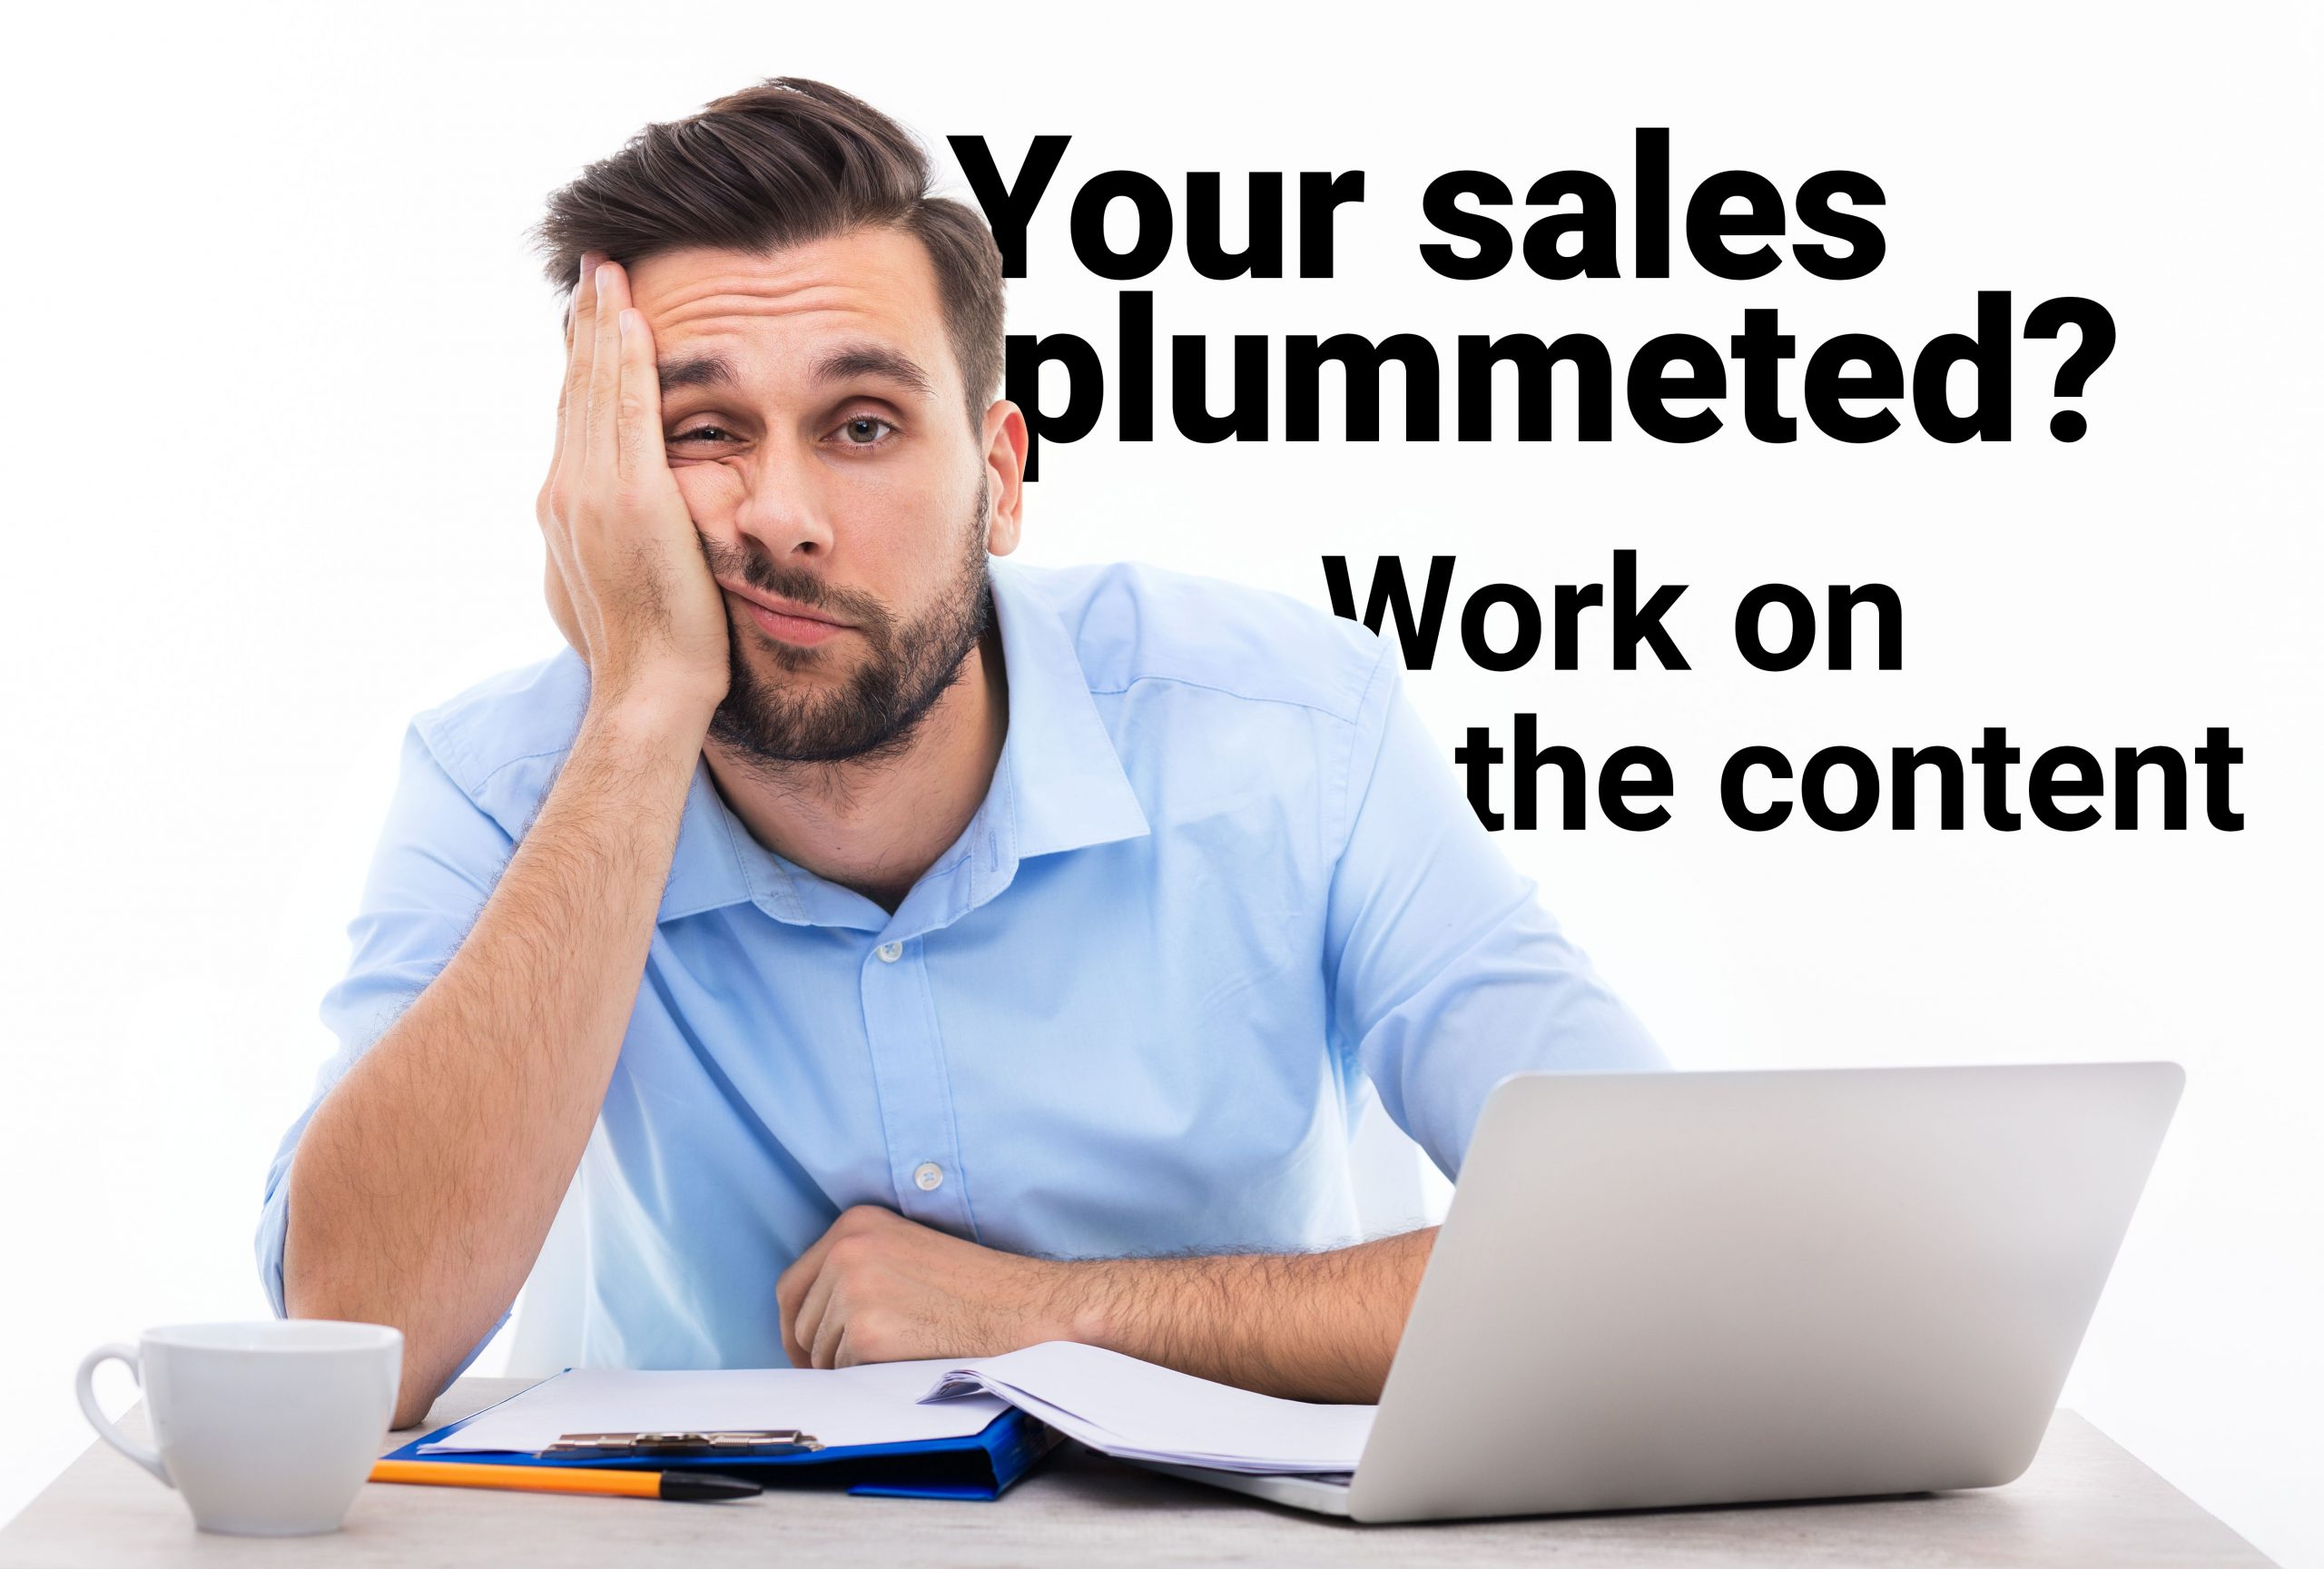 Have your sales plummeted? Work on the content.